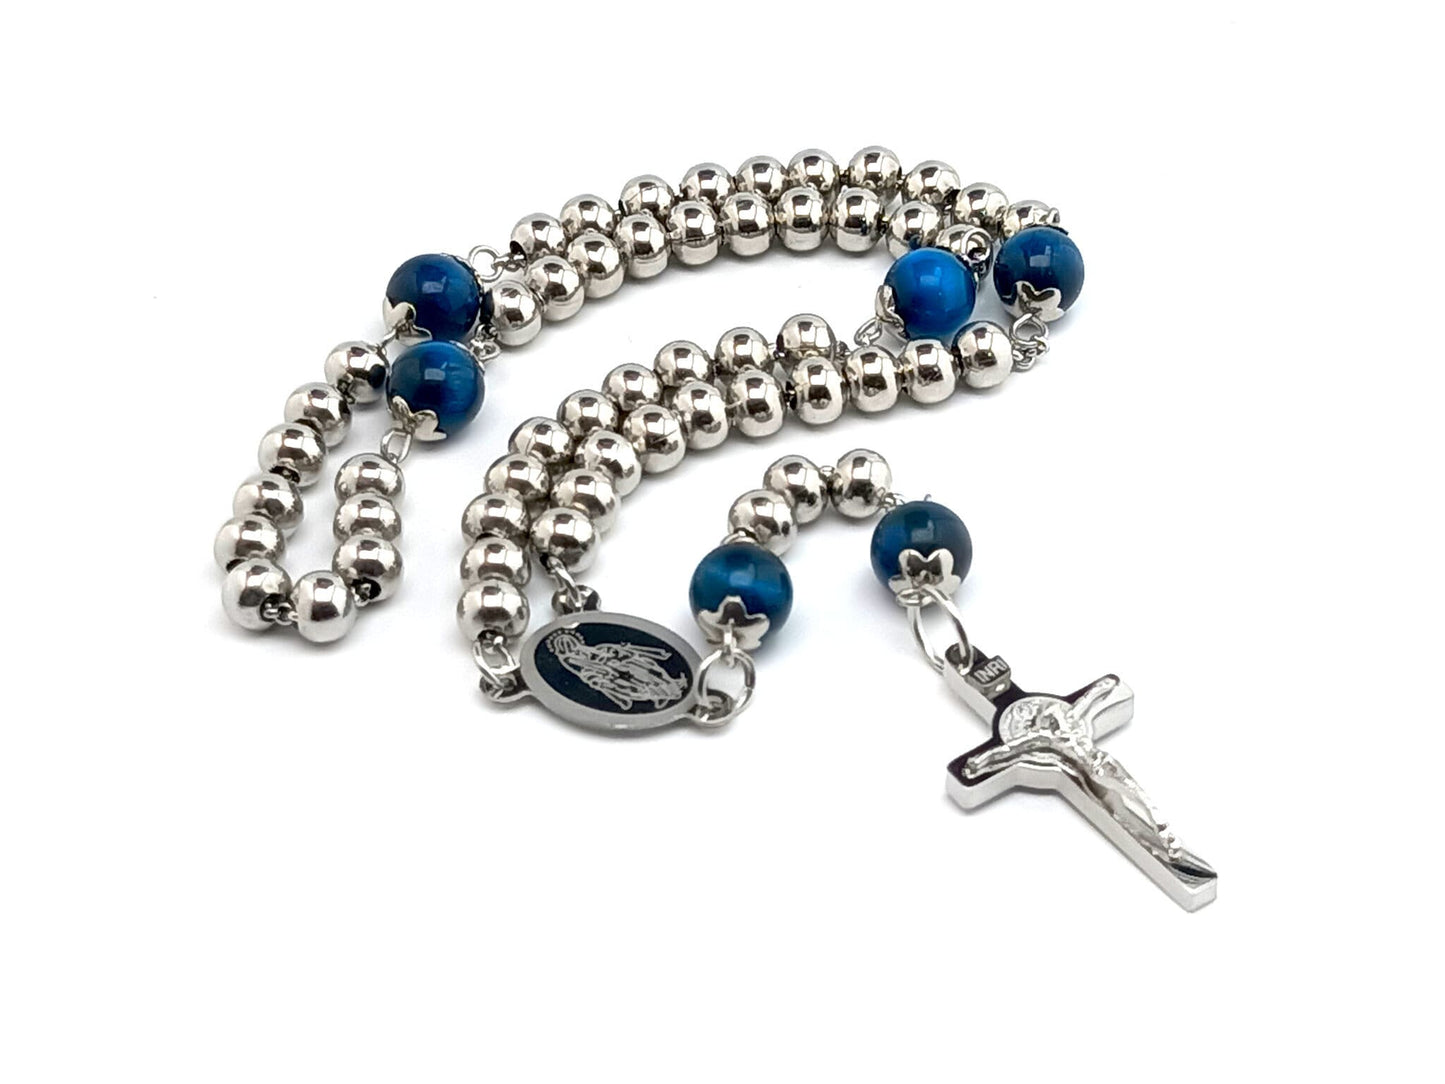 Our Lady of Grace unique rosary beads with hypoallergenic stainless steel and blue tigers eye beads, 925 sterling silver belcher chain and stainless steel crucifix and etched centre medal.